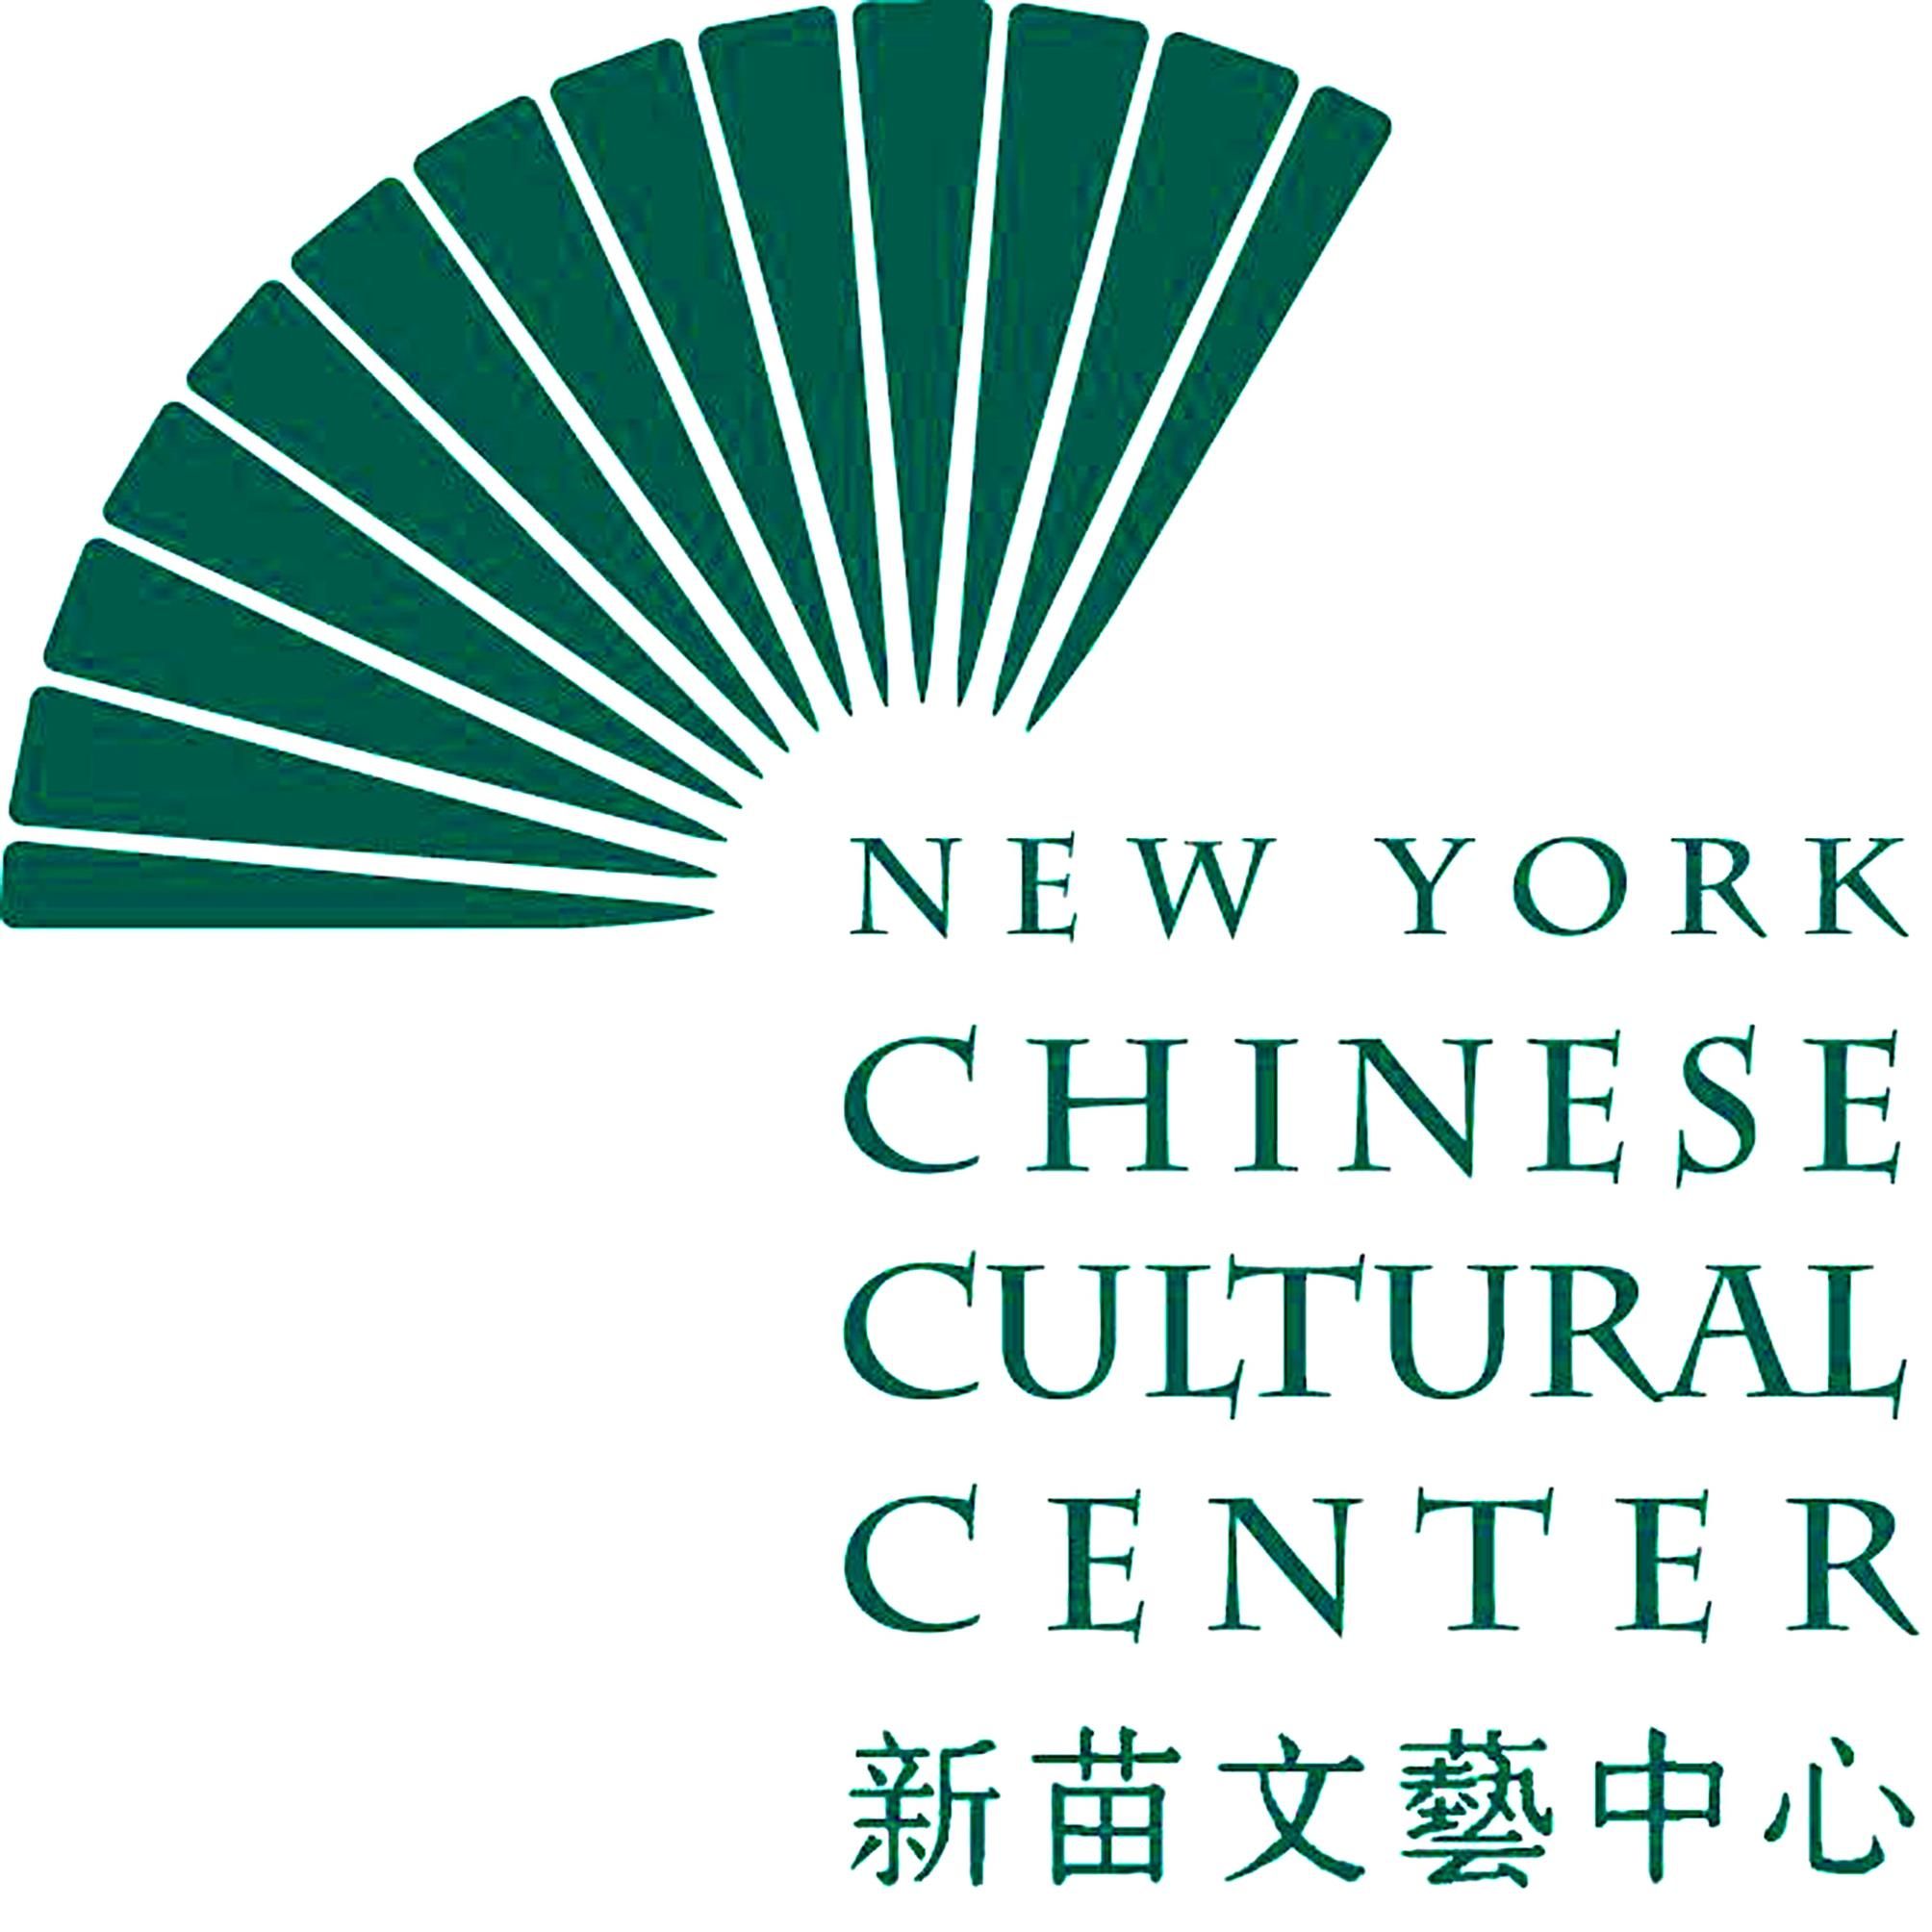 Chinese Organization in New York New York - New York Chinese Cultural Center